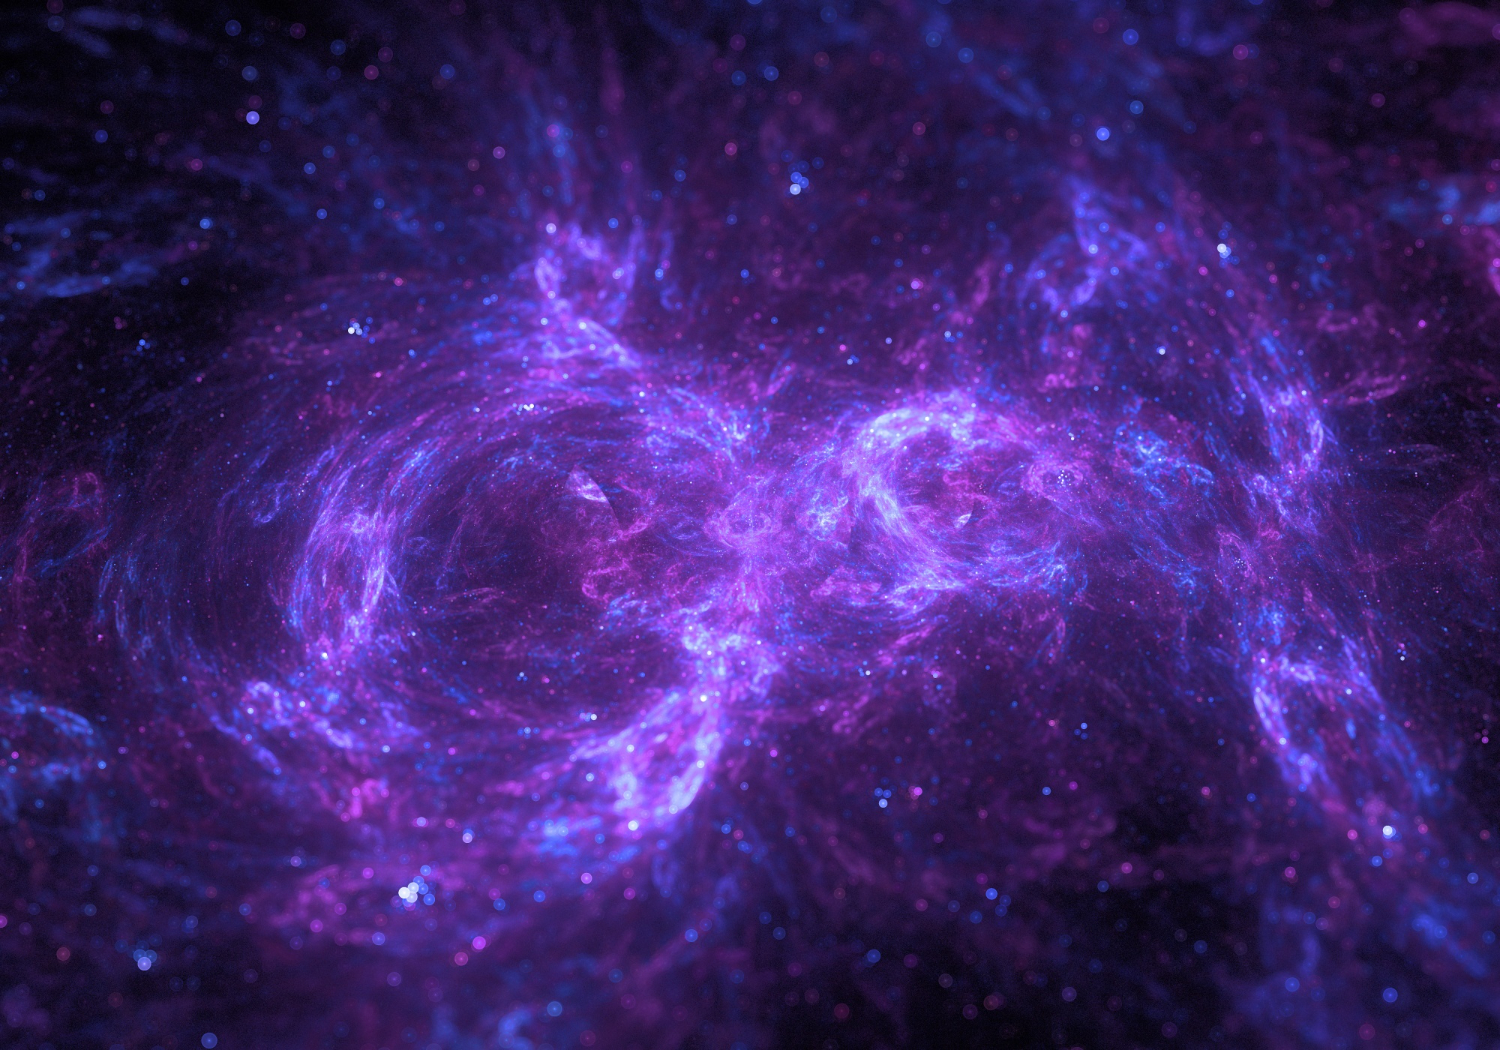 Turbulence In Galactic Centers - Clues From New Data